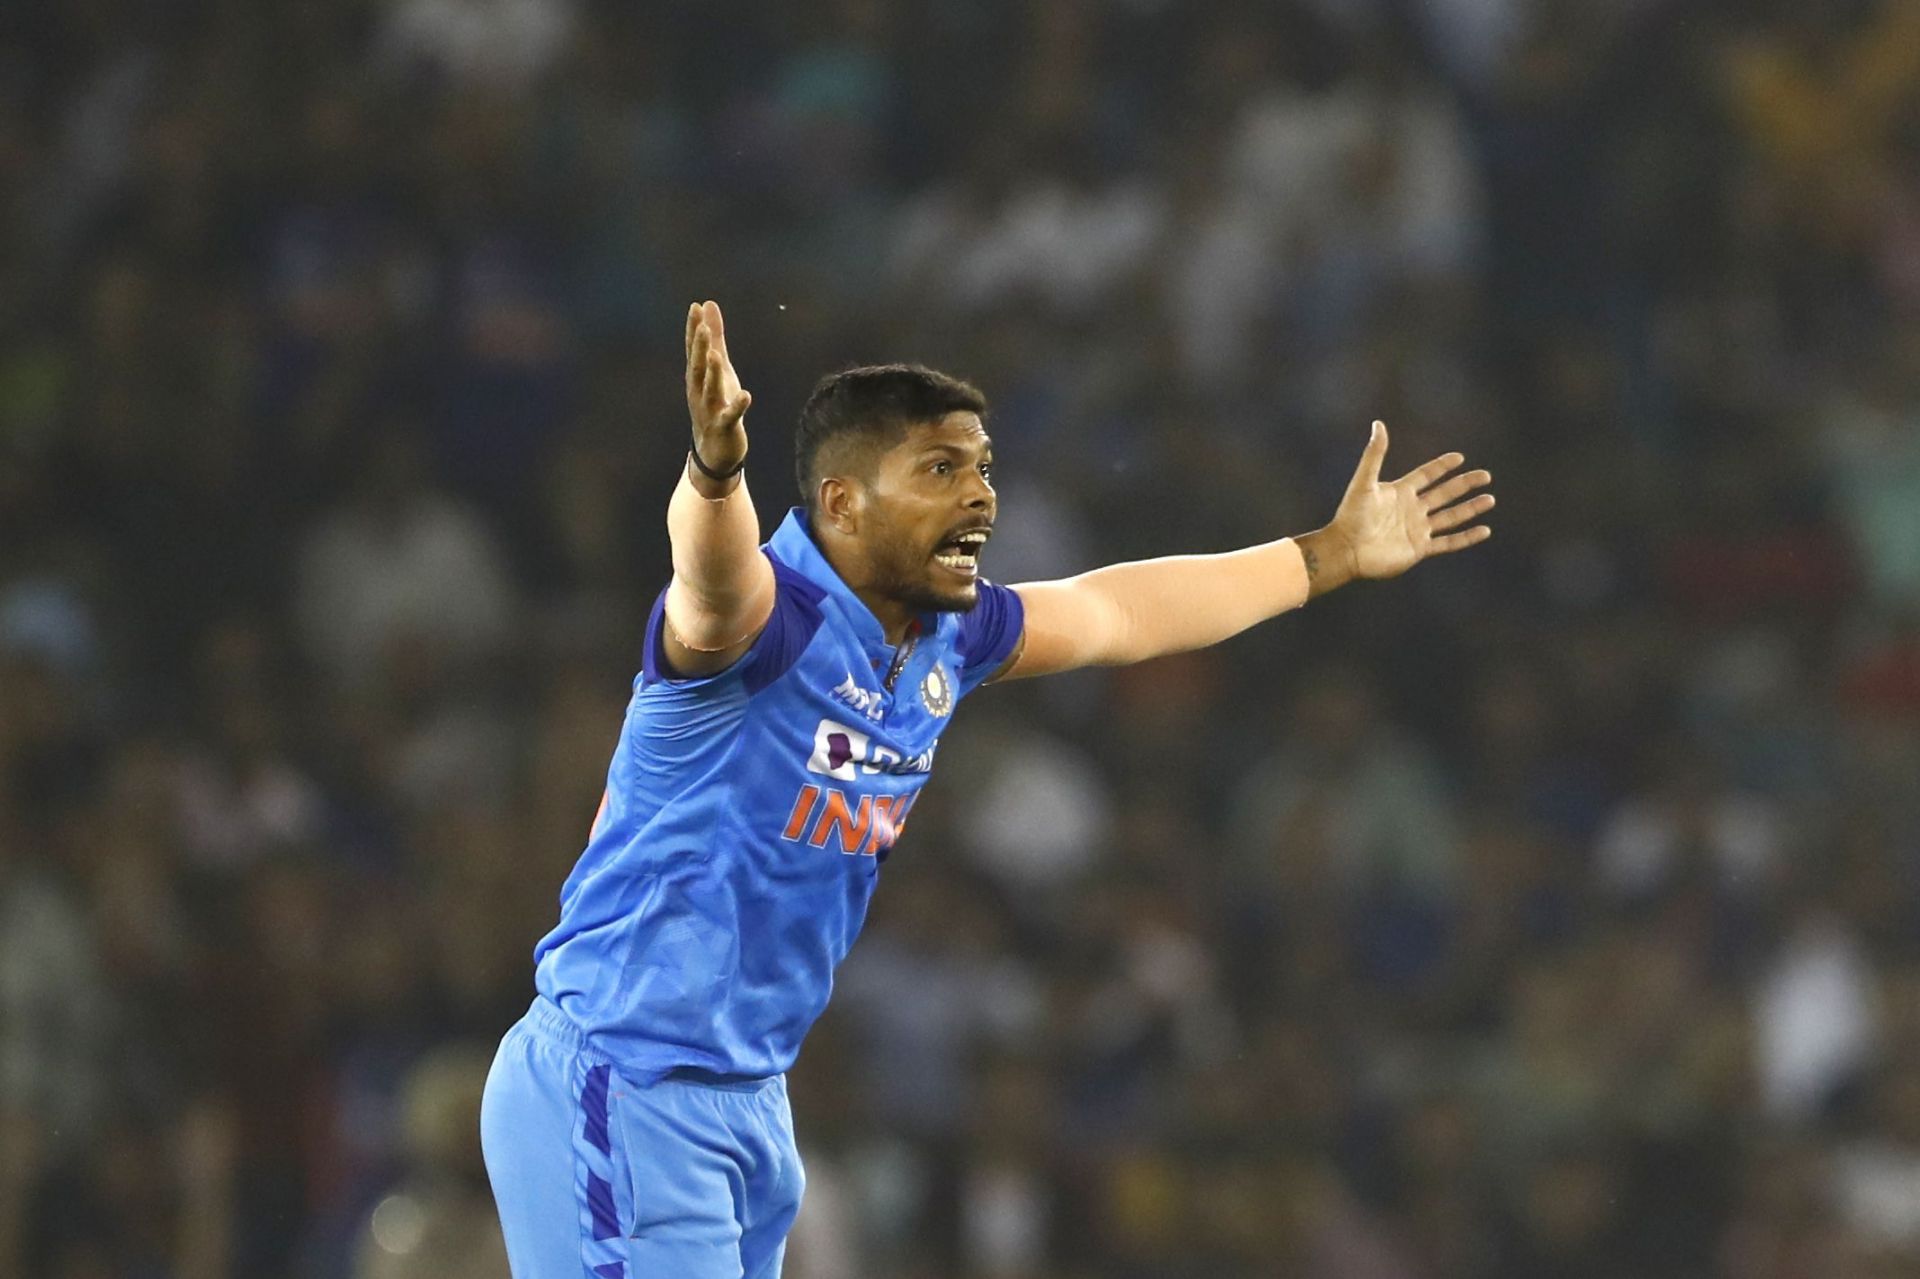 Umesh Yadav took 2 important wickets for India in Mohali. (Image: Getty)